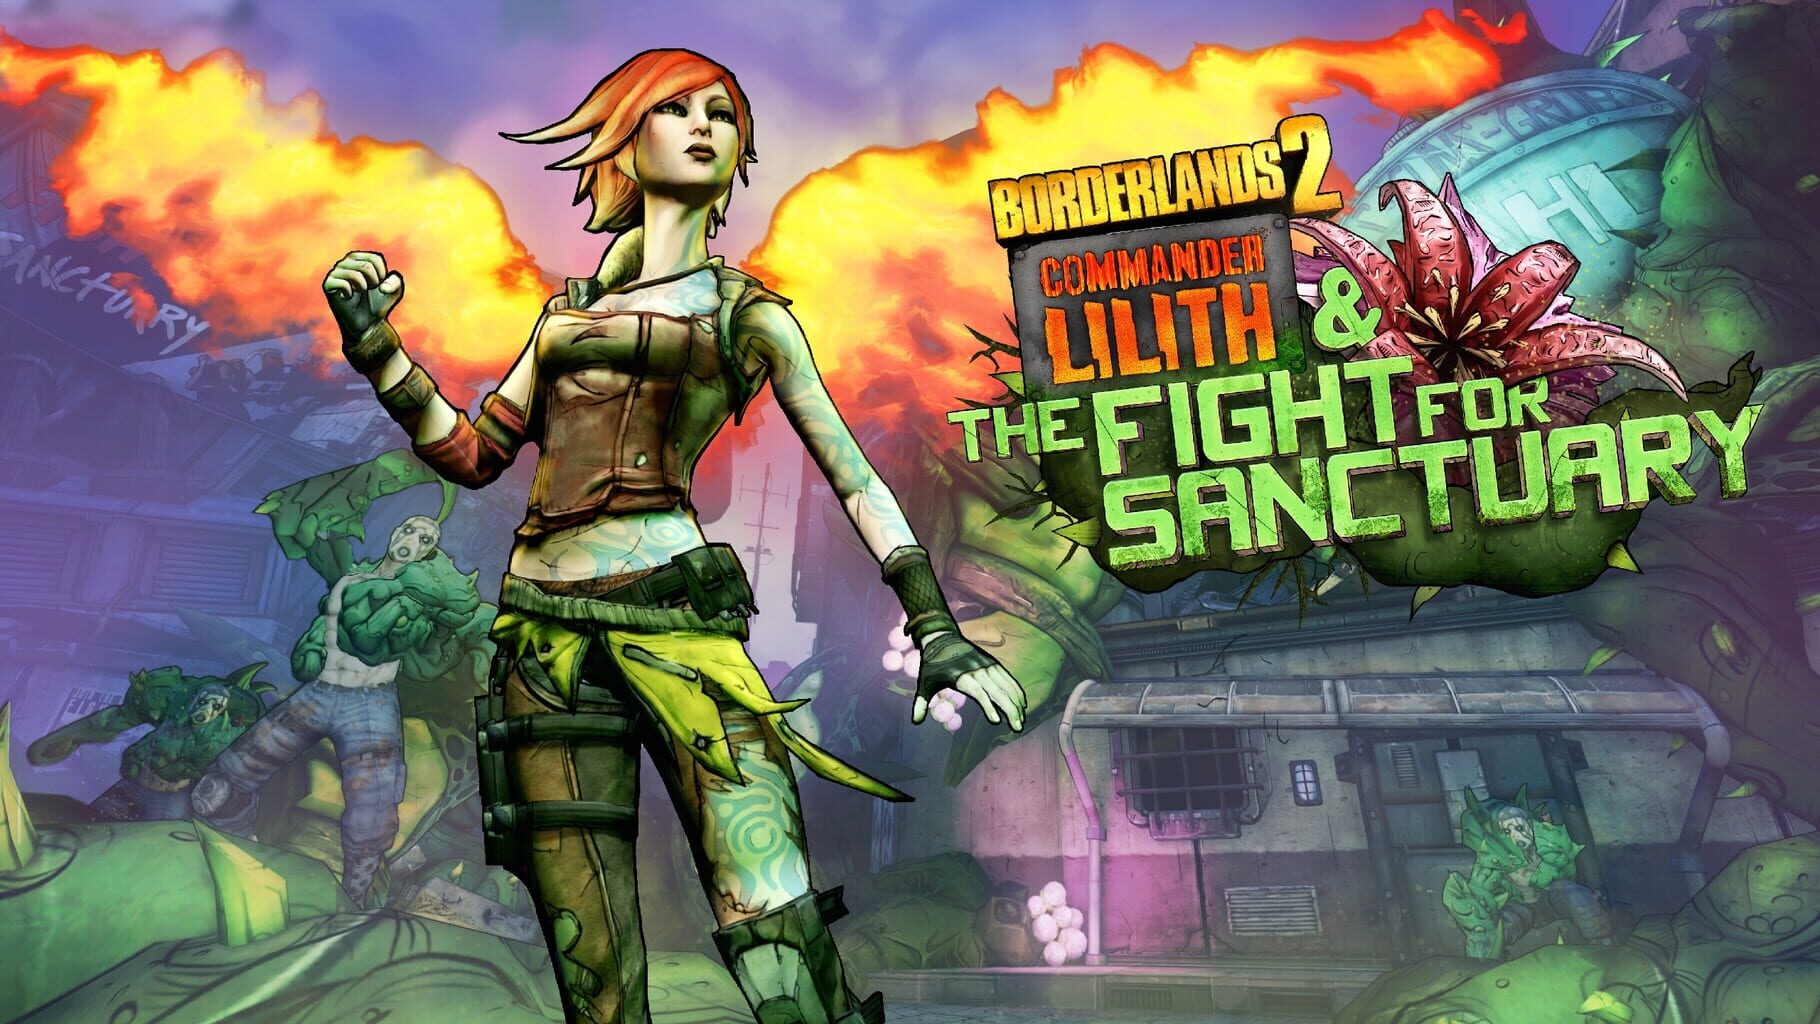 Arte - Borderlands 2: Commander Lilith and the Fight for Sanctuary